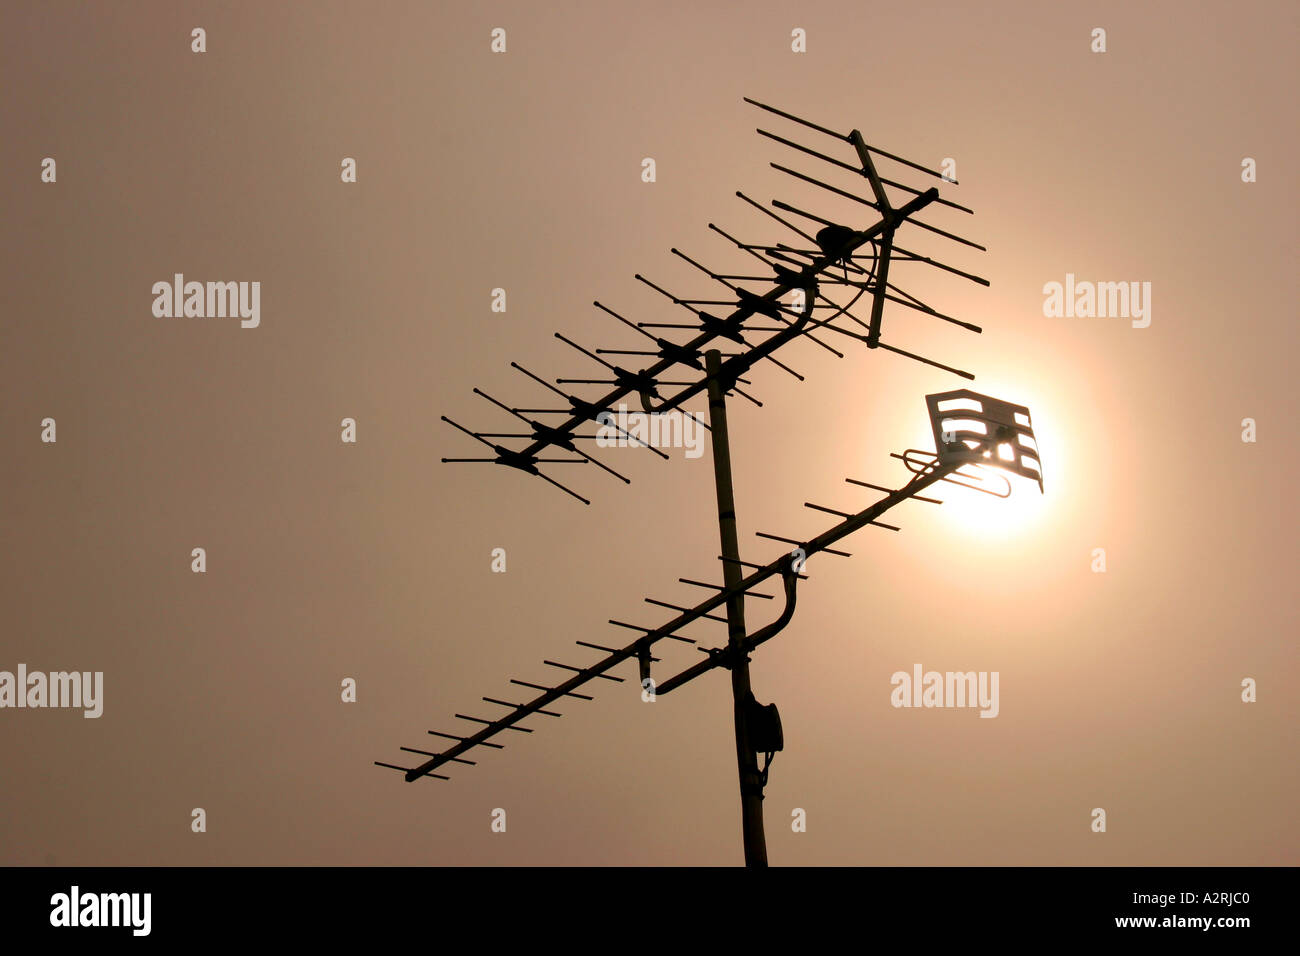 Television ariels Stock Photo